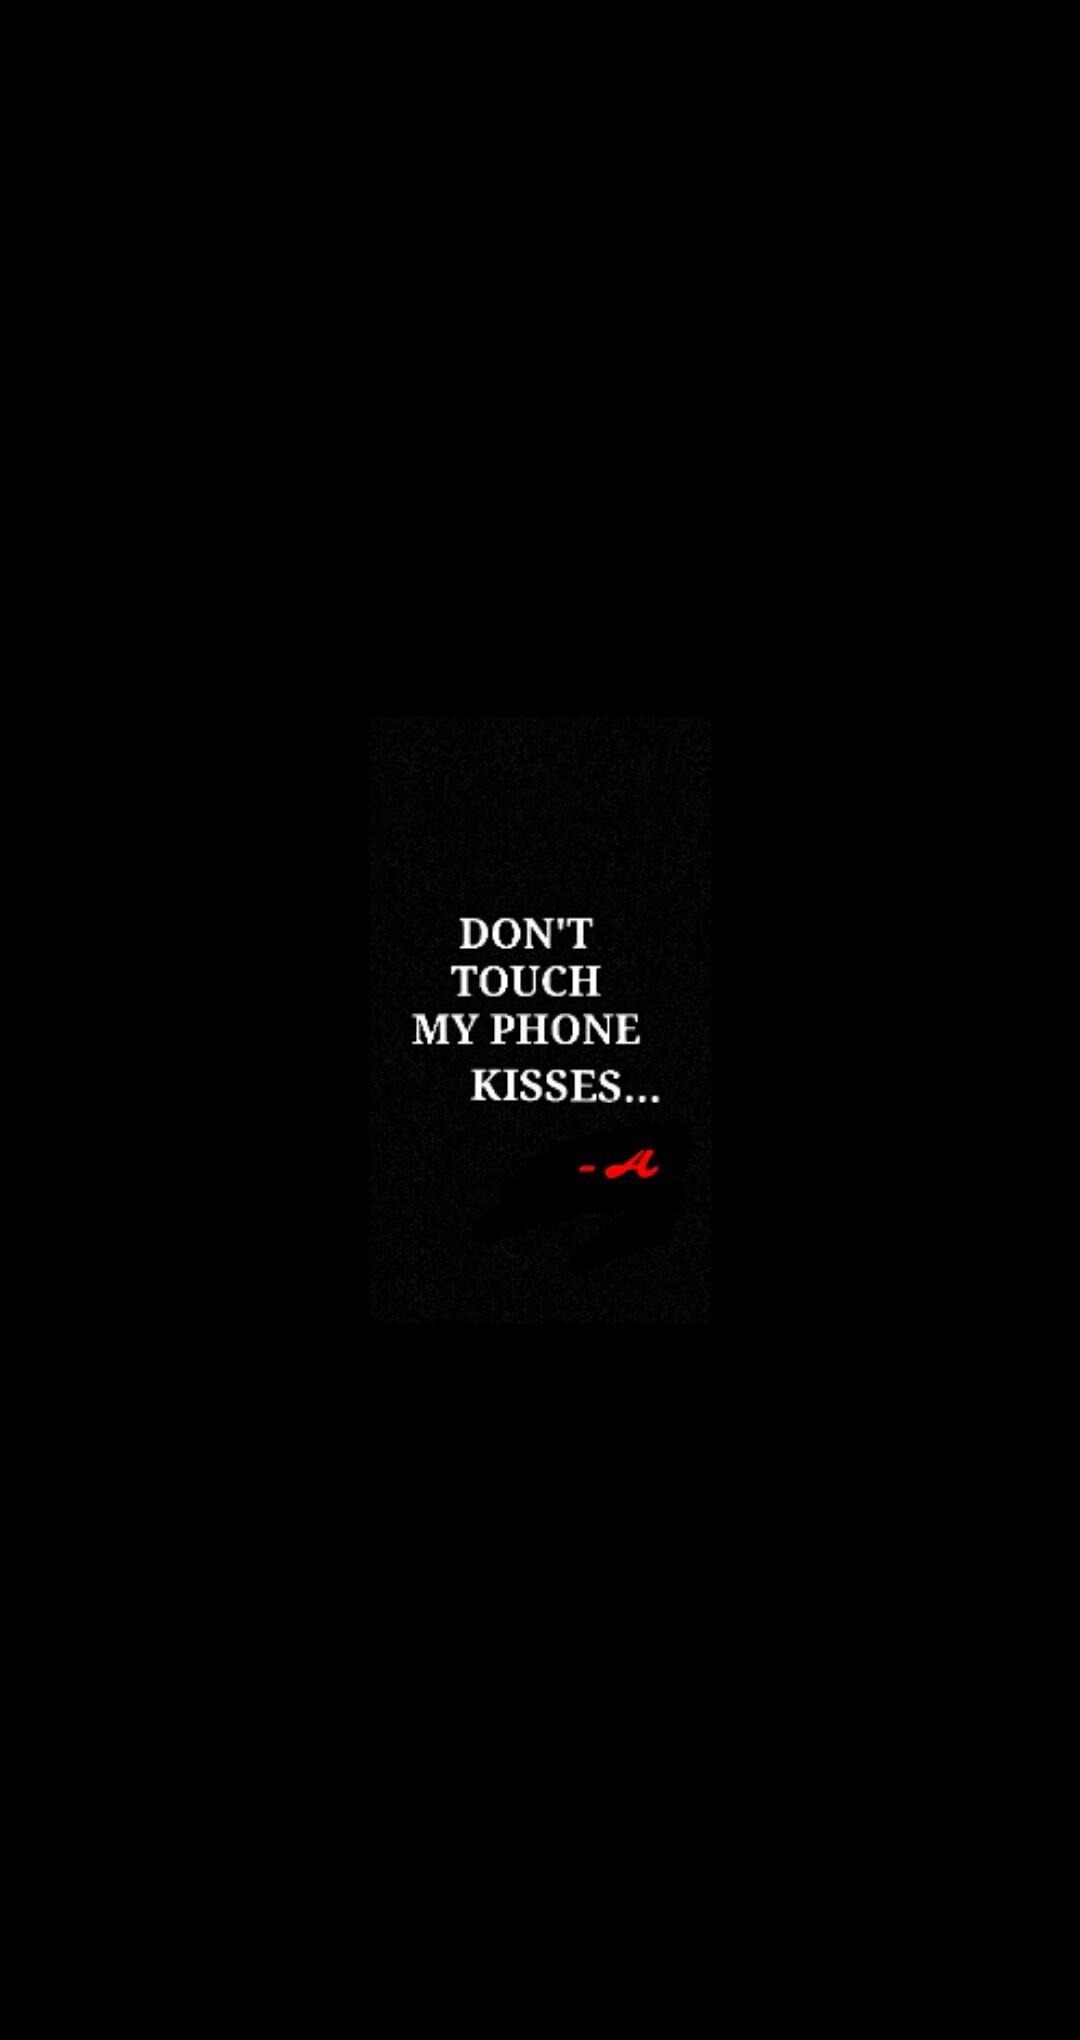 Don't Touch My Phone HD Black Wallpaper